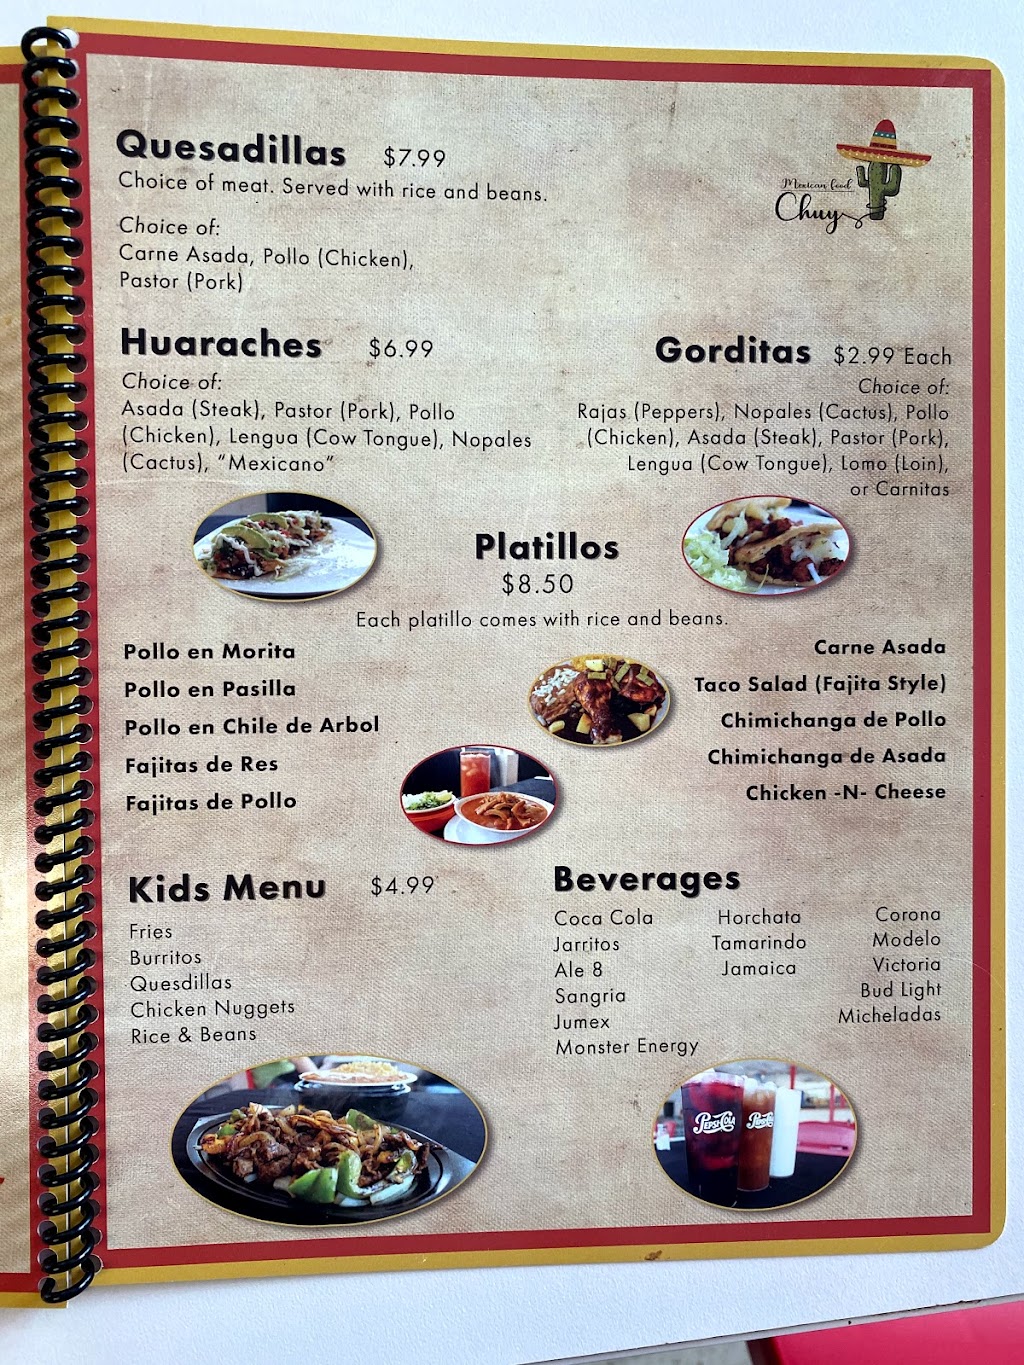 Chuy Mexican Food | 415 N Main St, Winchester, KY 40391 | Phone: (859) 644-5166